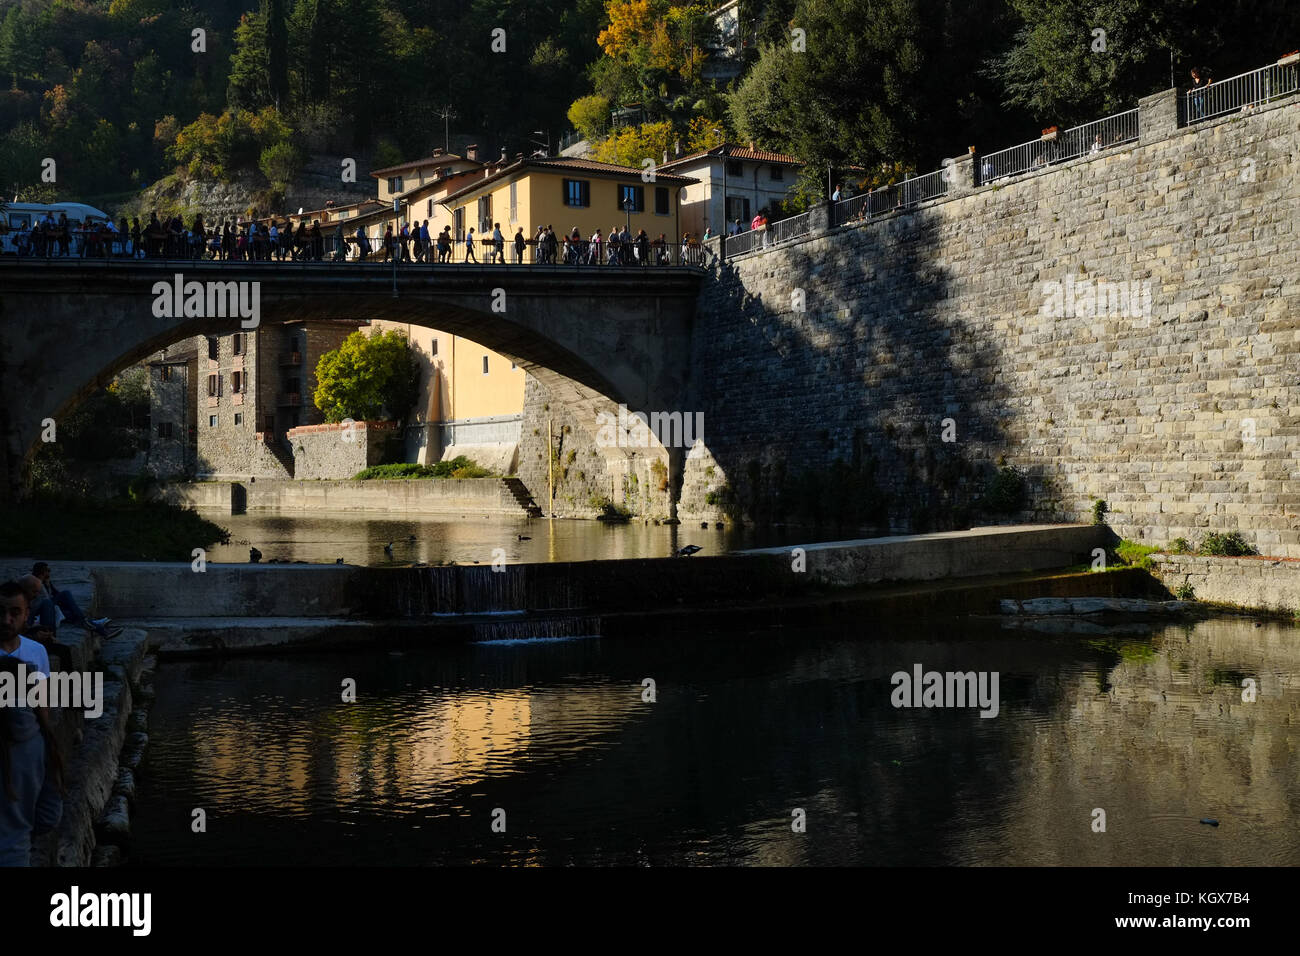 Autumn sunny day of the river just outside the old town of Marradi, Tuscany well know old town for the celebration of chestnuts every year on October. Stock Photo